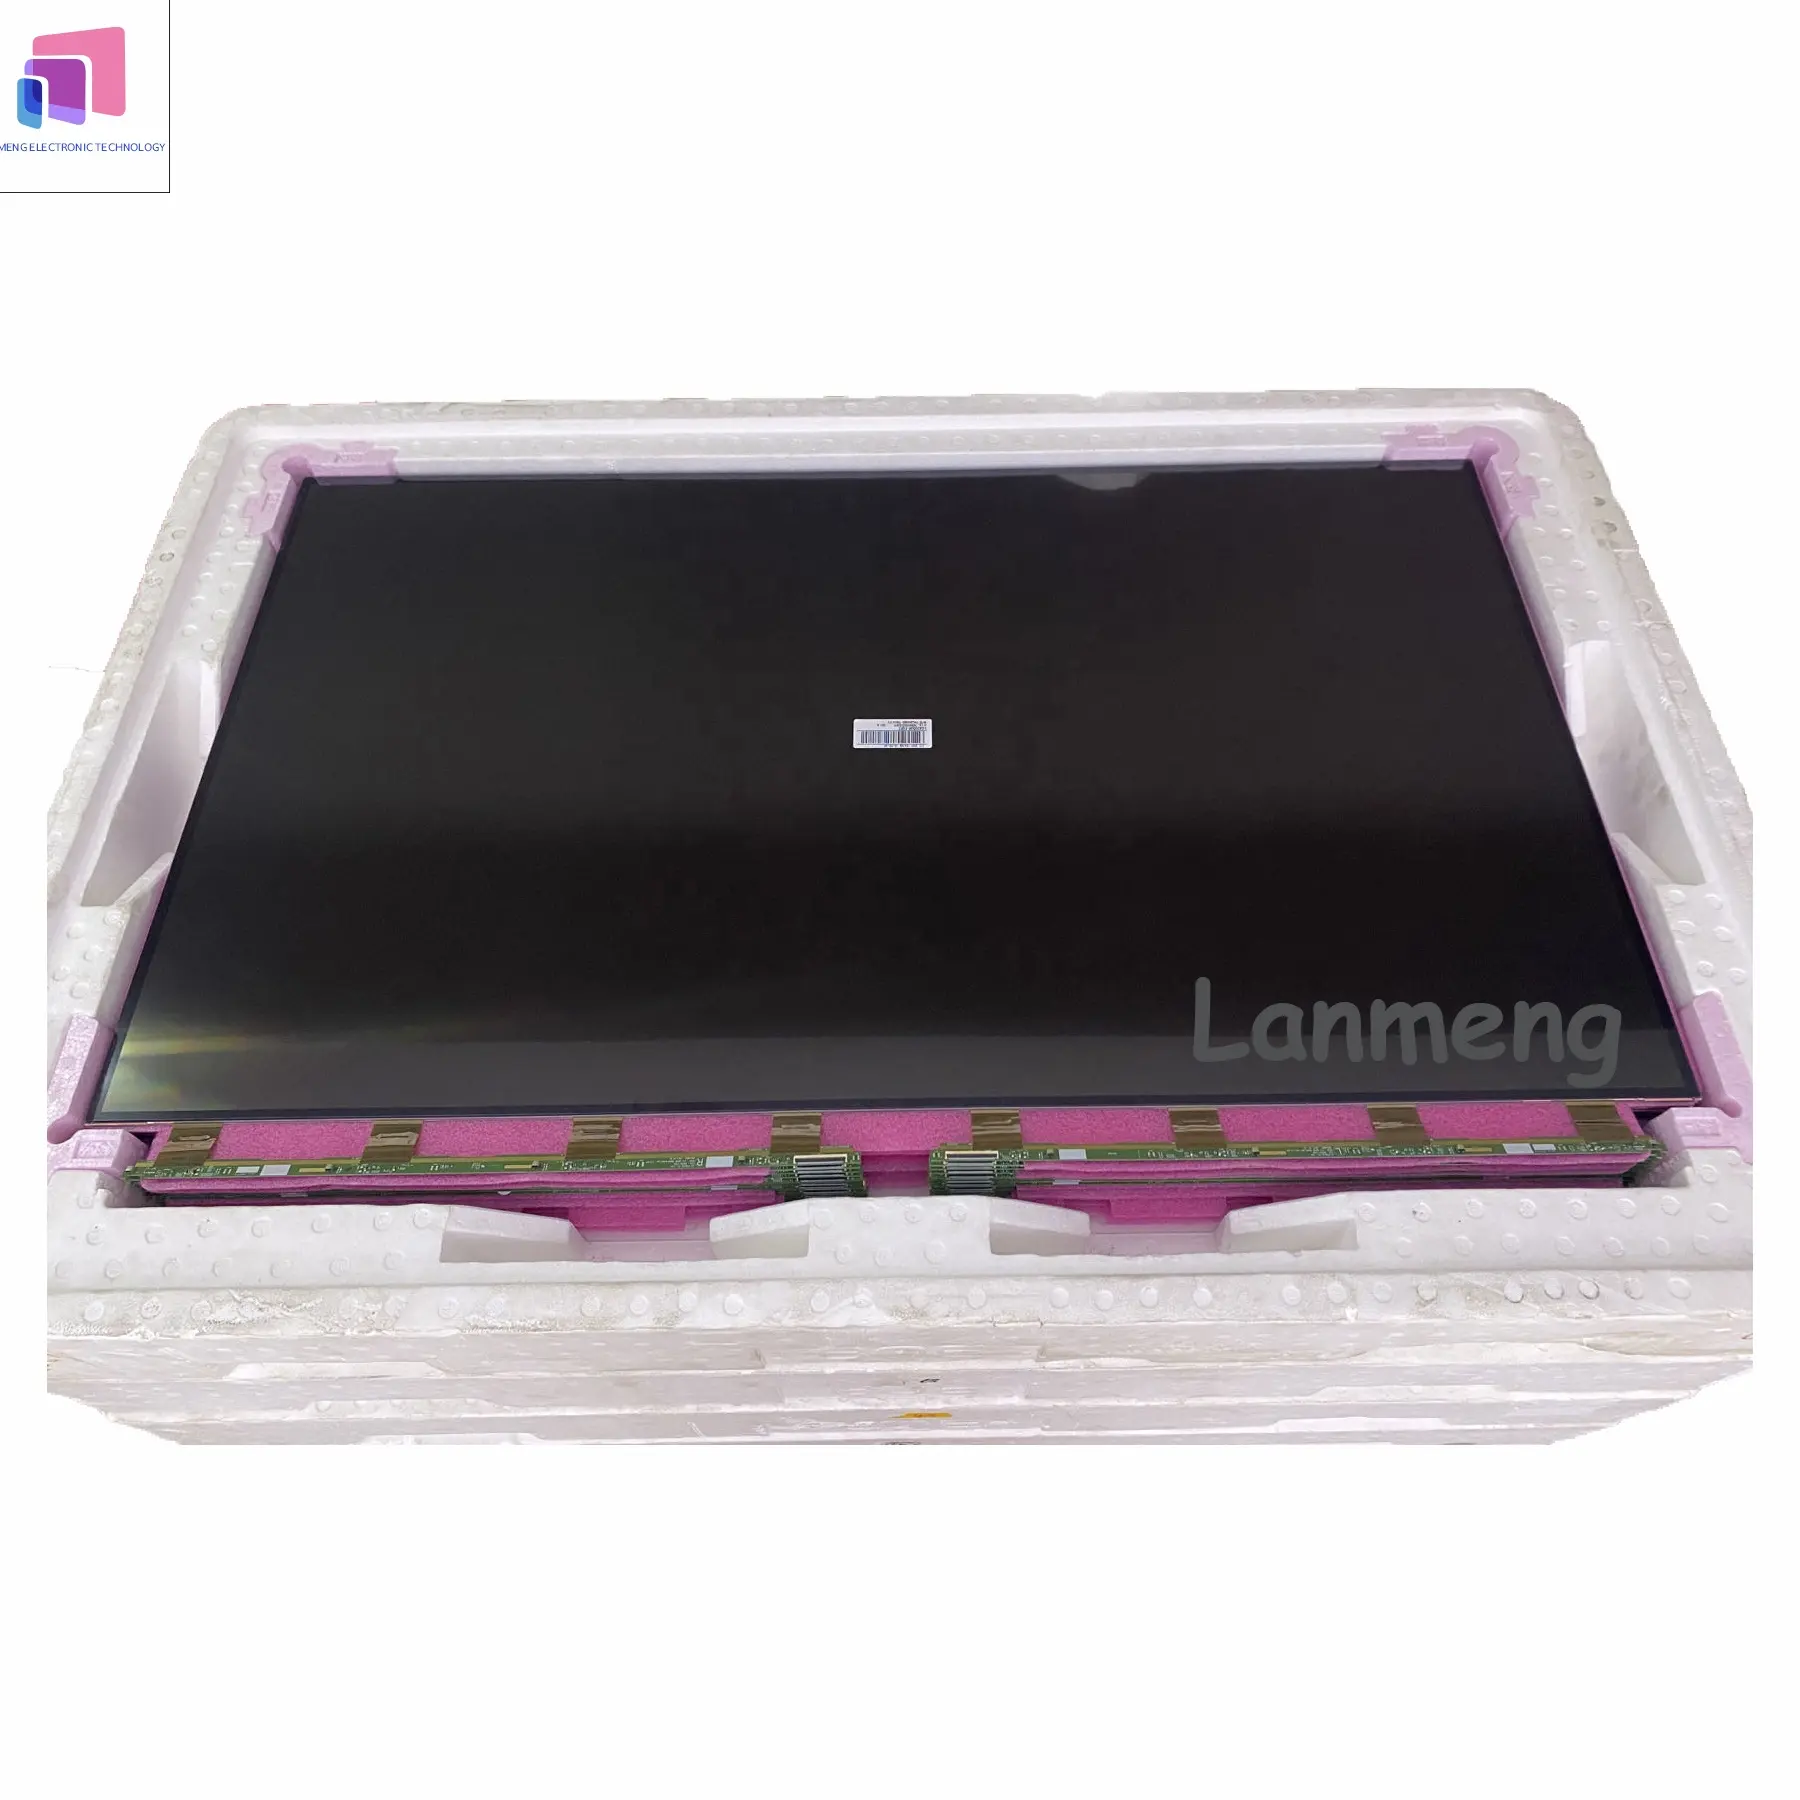 LC420DUK-SGK2 4+4 cof in stock for 42 inch lg open cell display panel